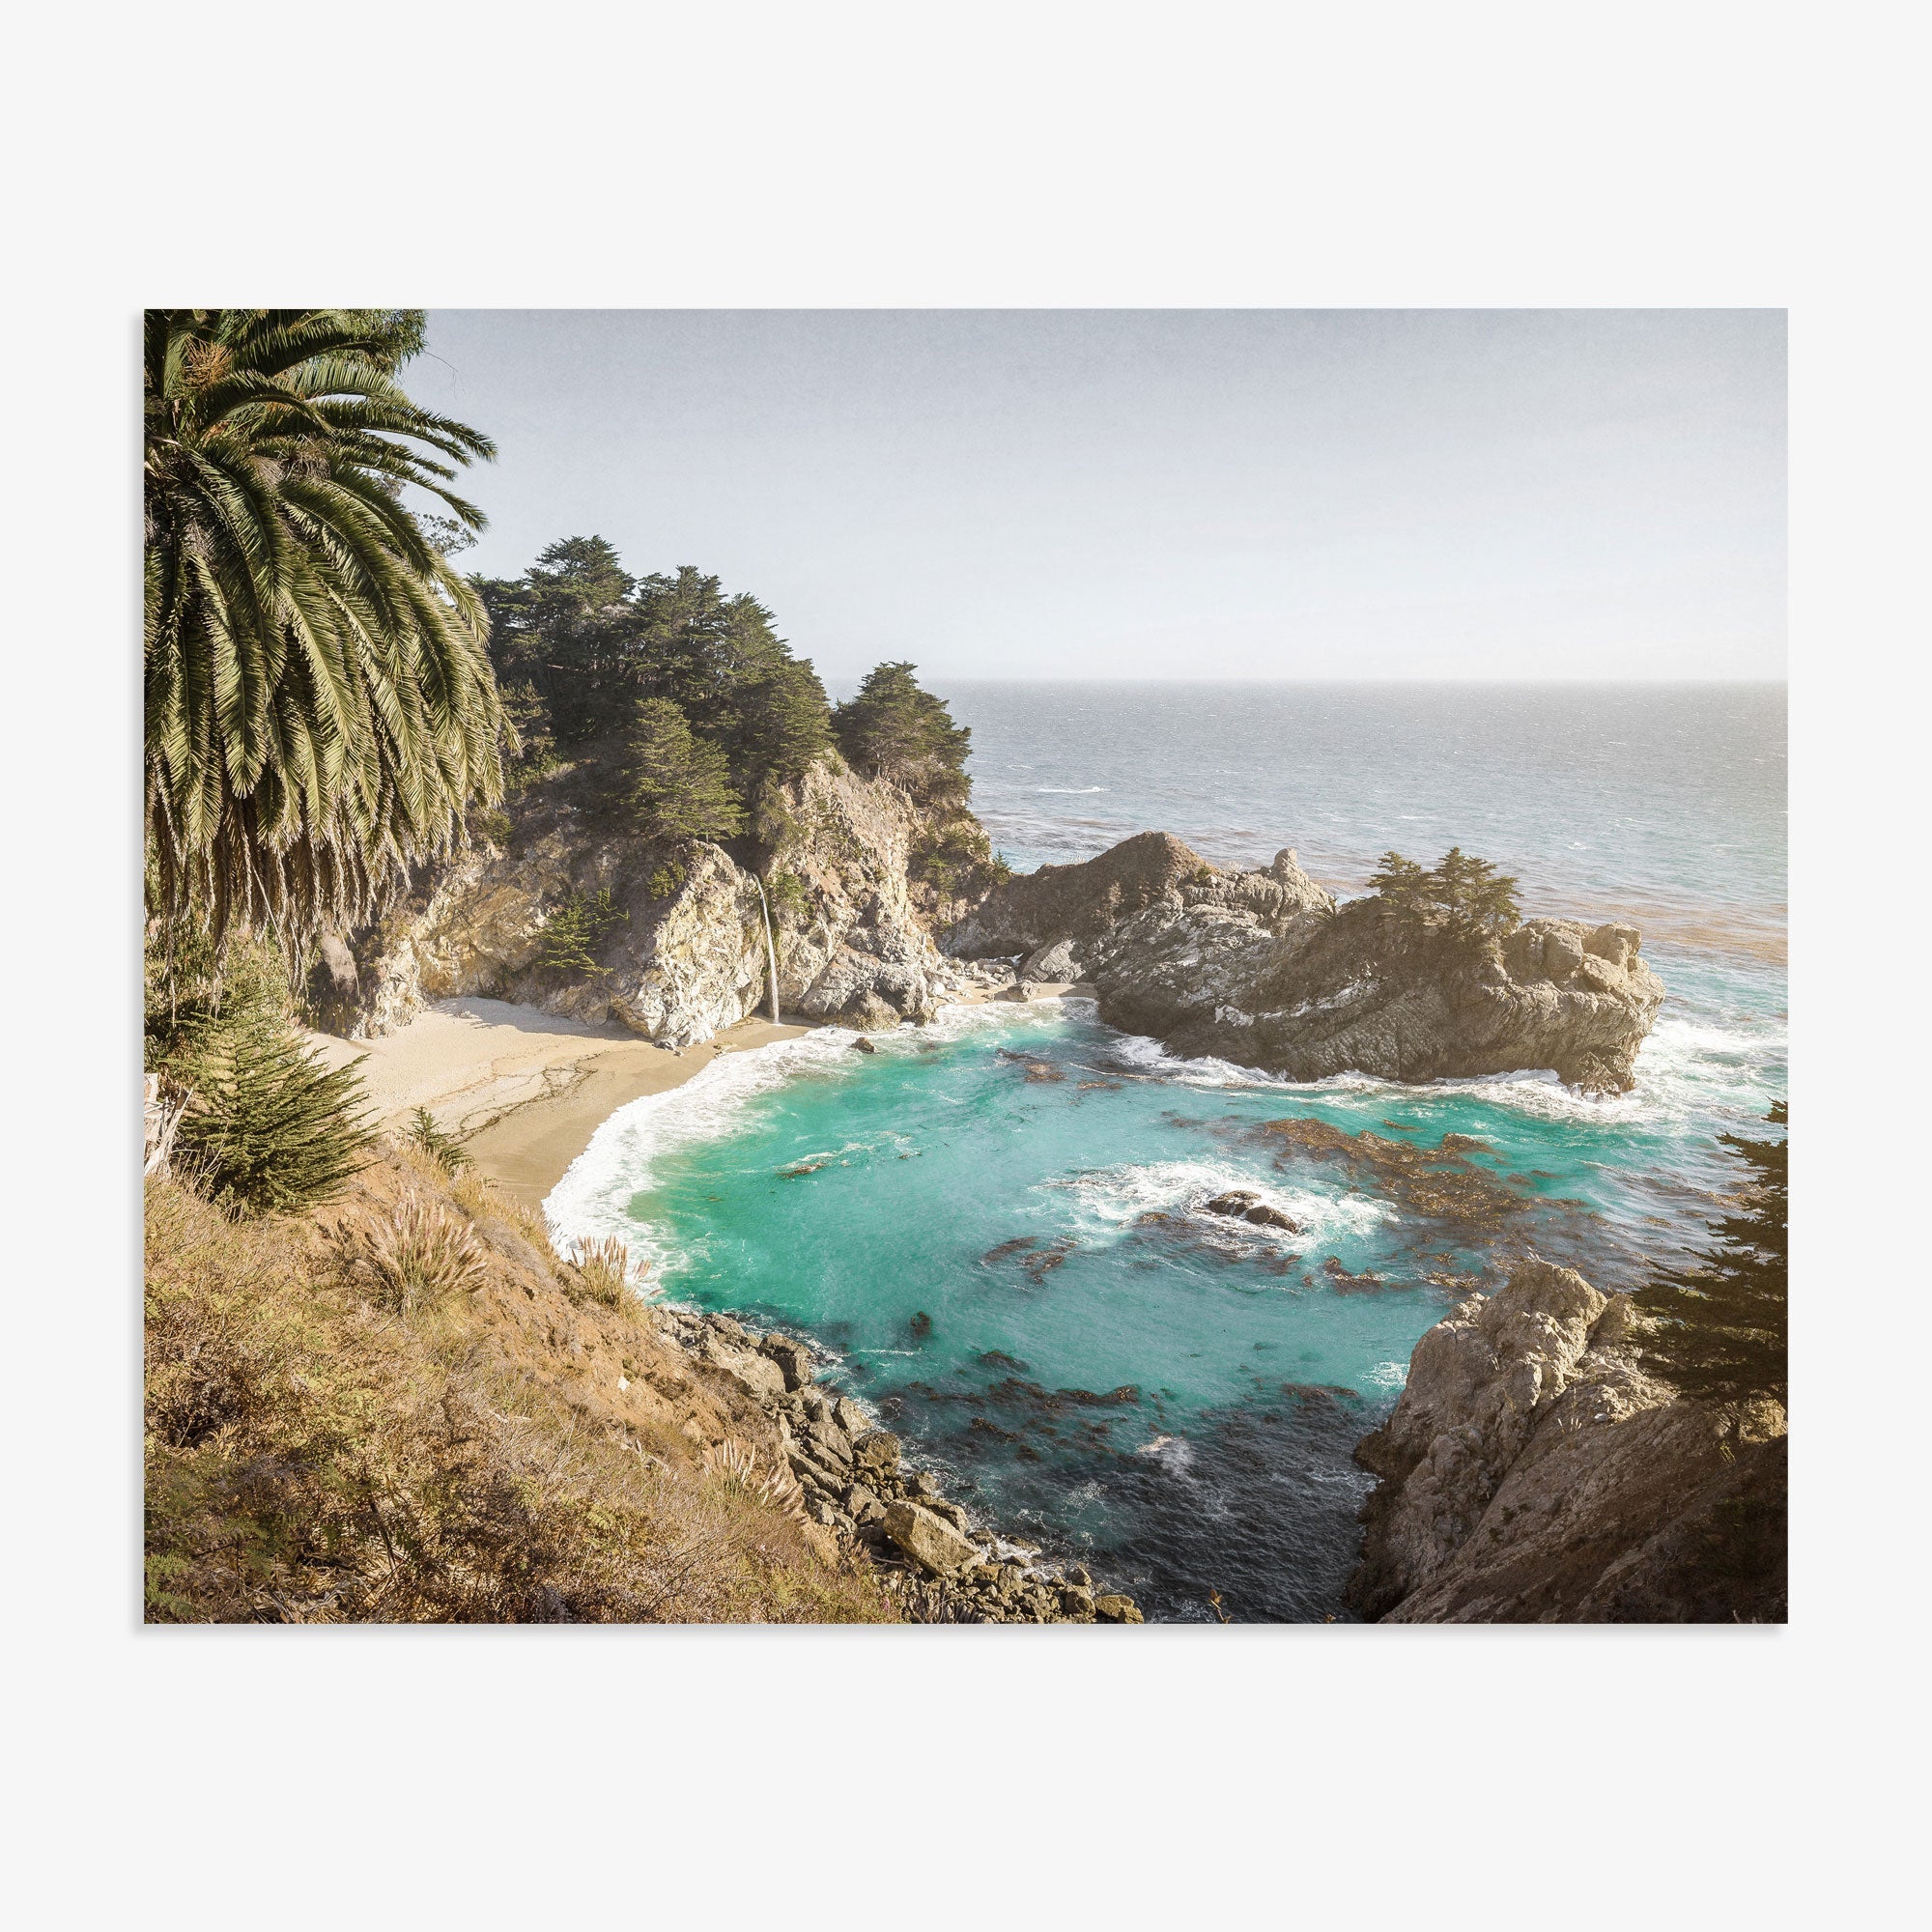 A scenic coastline with turquoise waters surrounded by rugged cliffs and lush greenery, featuring a prominent cove and a tall palm tree on the left, captures the essence of Offley Green&#39;s Big Sur Coastal Print, &#39;Julia Pffeifer&#39; wall art.